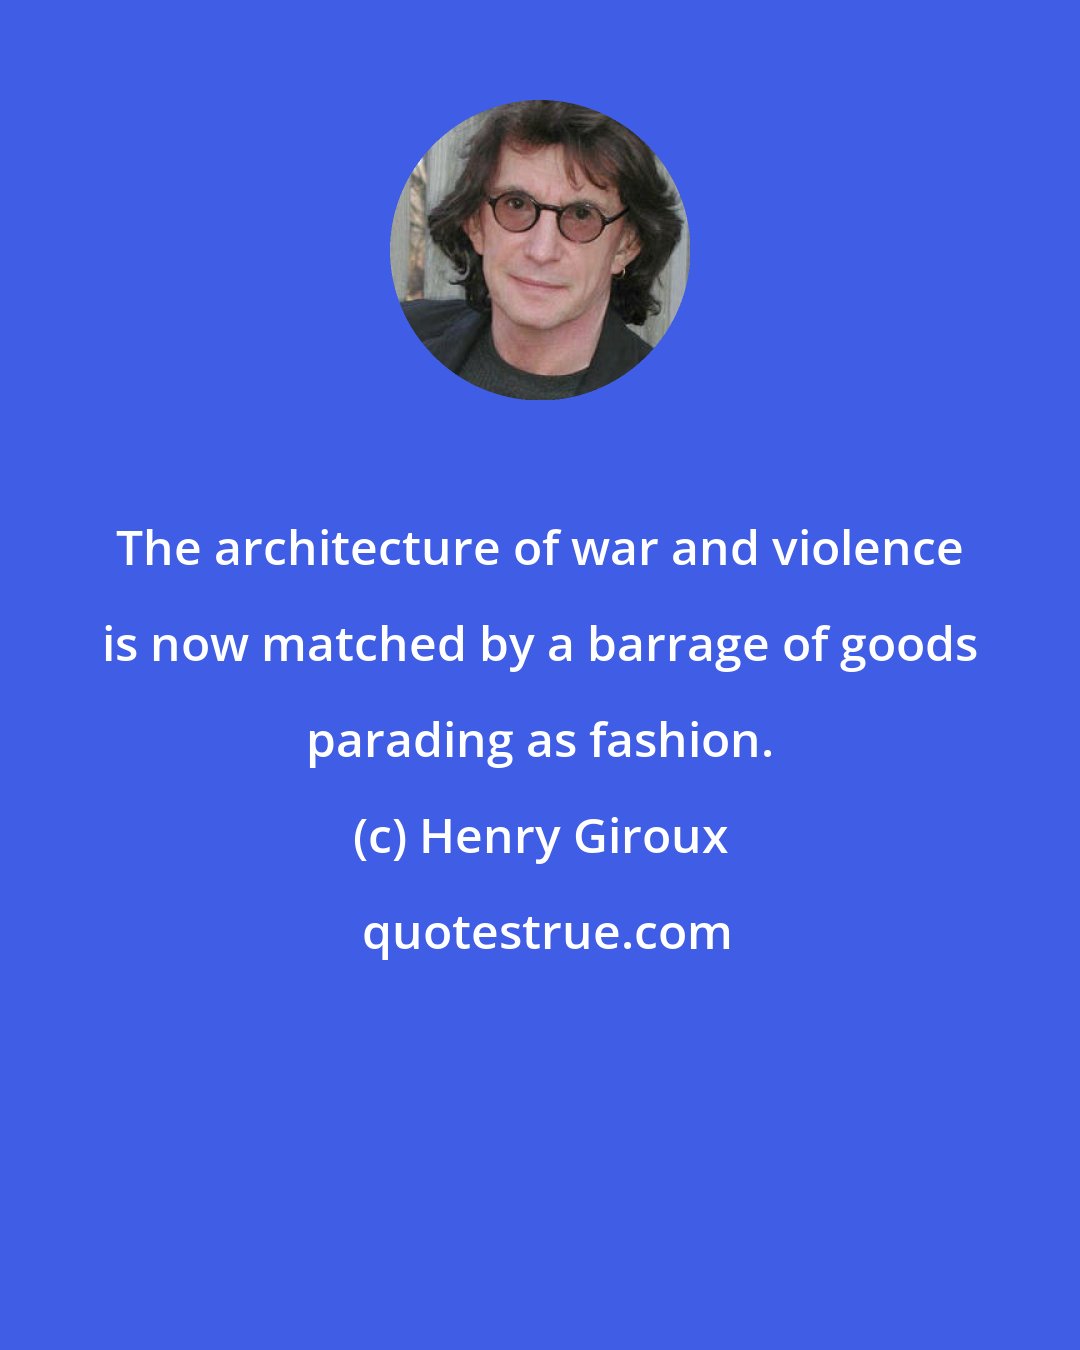 Henry Giroux: The architecture of war and violence is now matched by a barrage of goods parading as fashion.